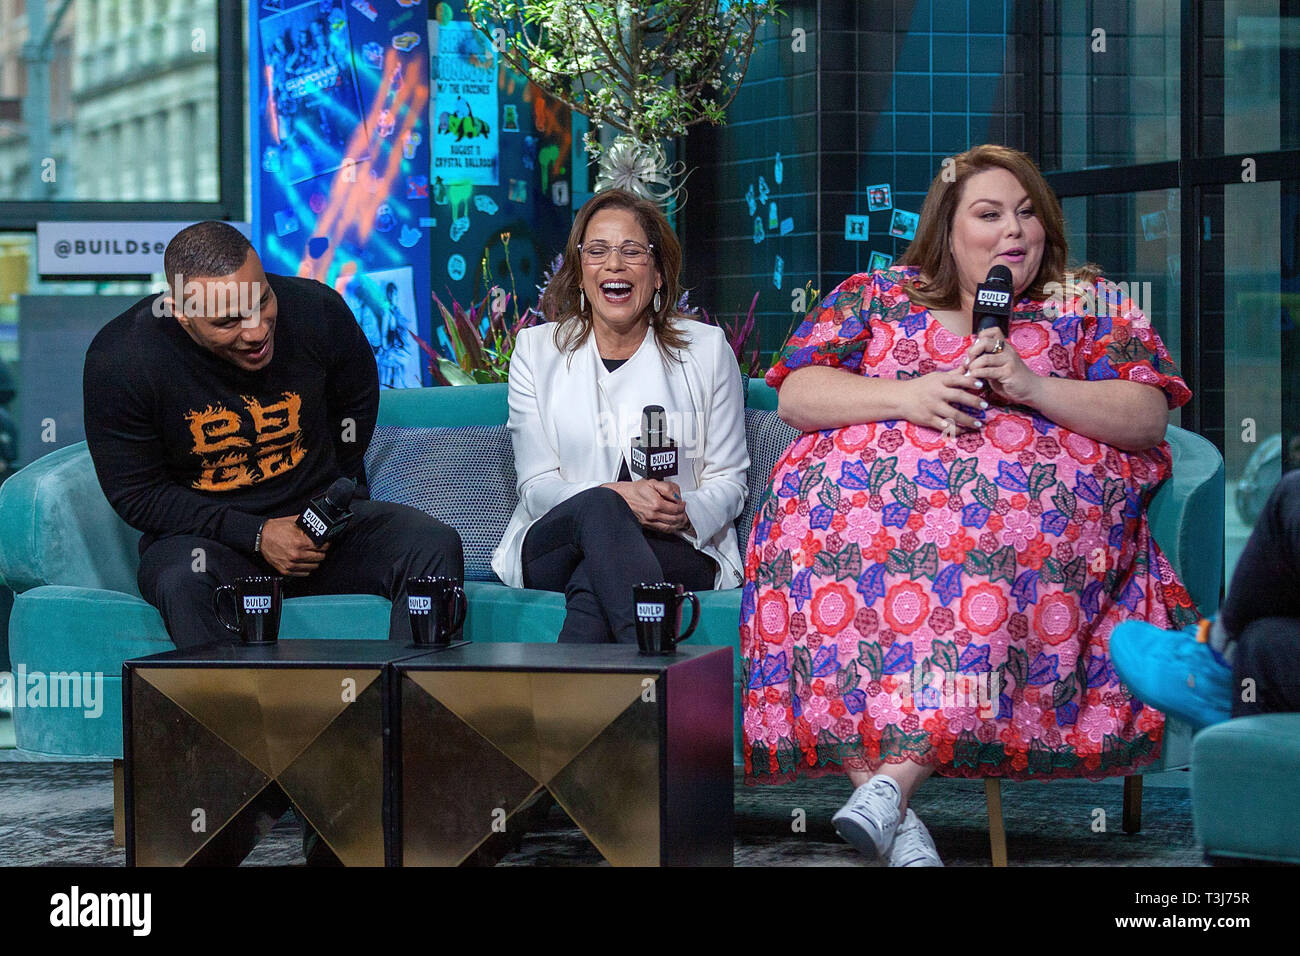 New York, USA. 09 Apr, 2019.  DeVon Franklin, Roxann Dawson, and, Chrissy Metz at The BUILD Series discussing “Breakthrough” at BUILD Studio on April 09, 2019 in New York, NY. Credit: Steve Mack/S.D. Mack Pictures/Alamy Stock Photo